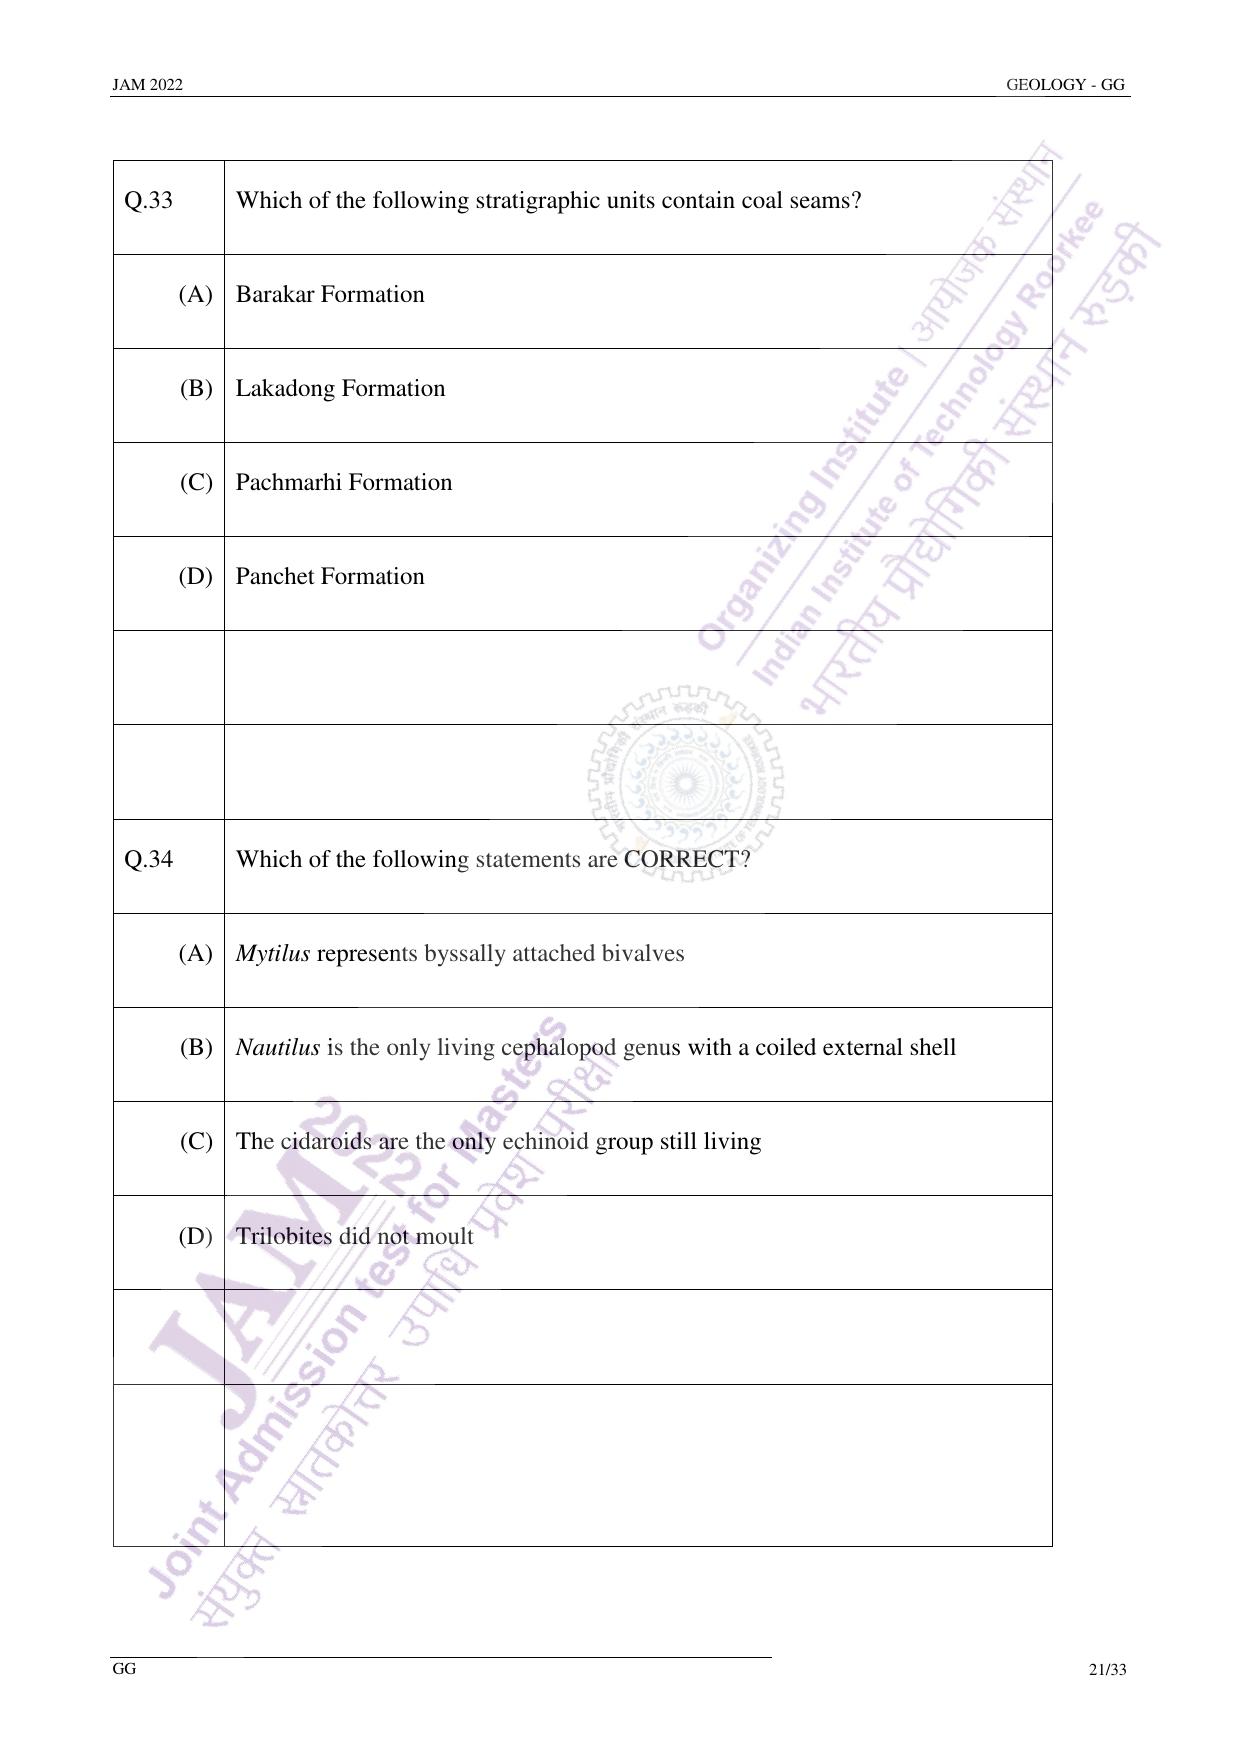 JAM 2022: GG Question Paper - Page 20